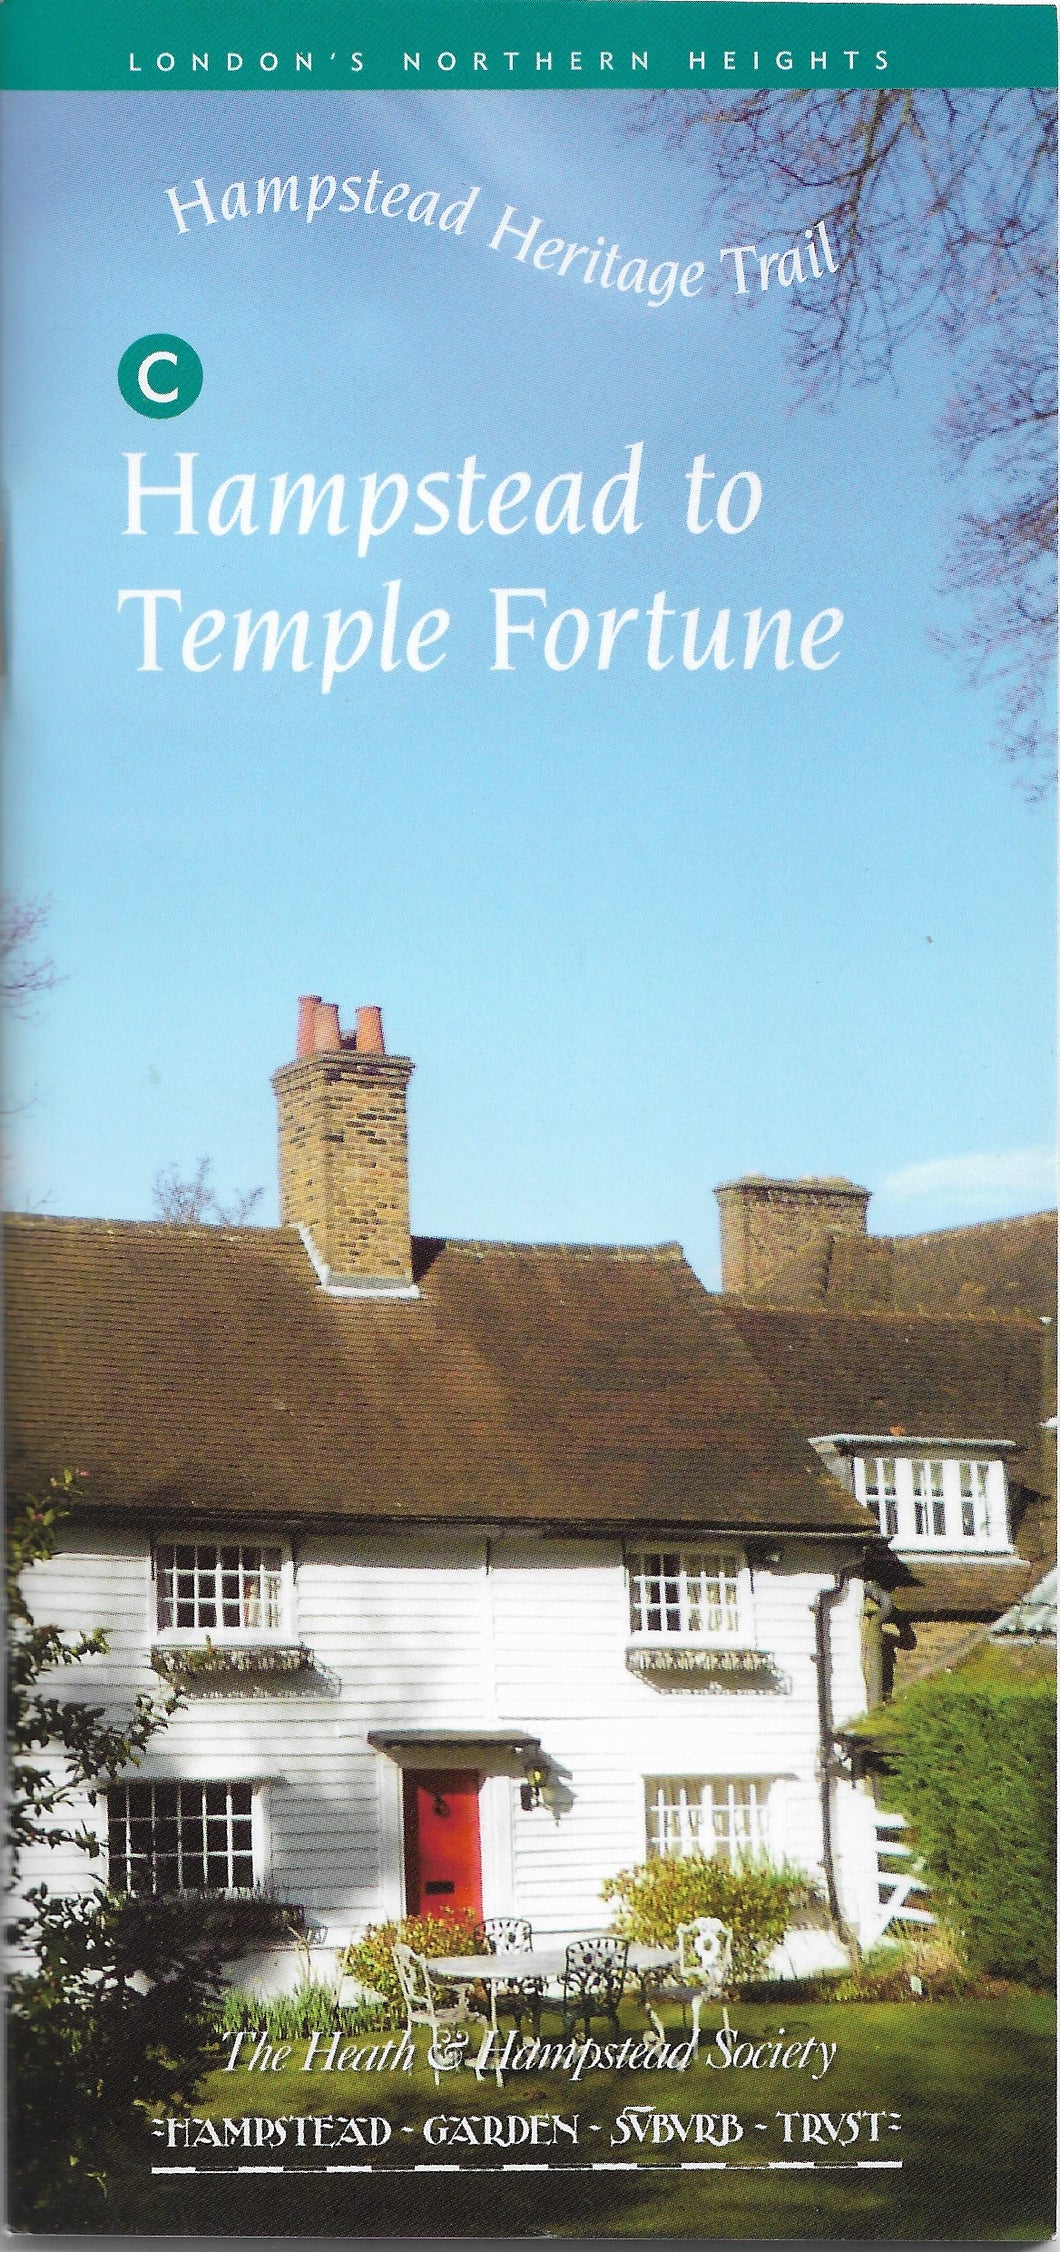 Guide - (C) Hampstead to Temple Fortune